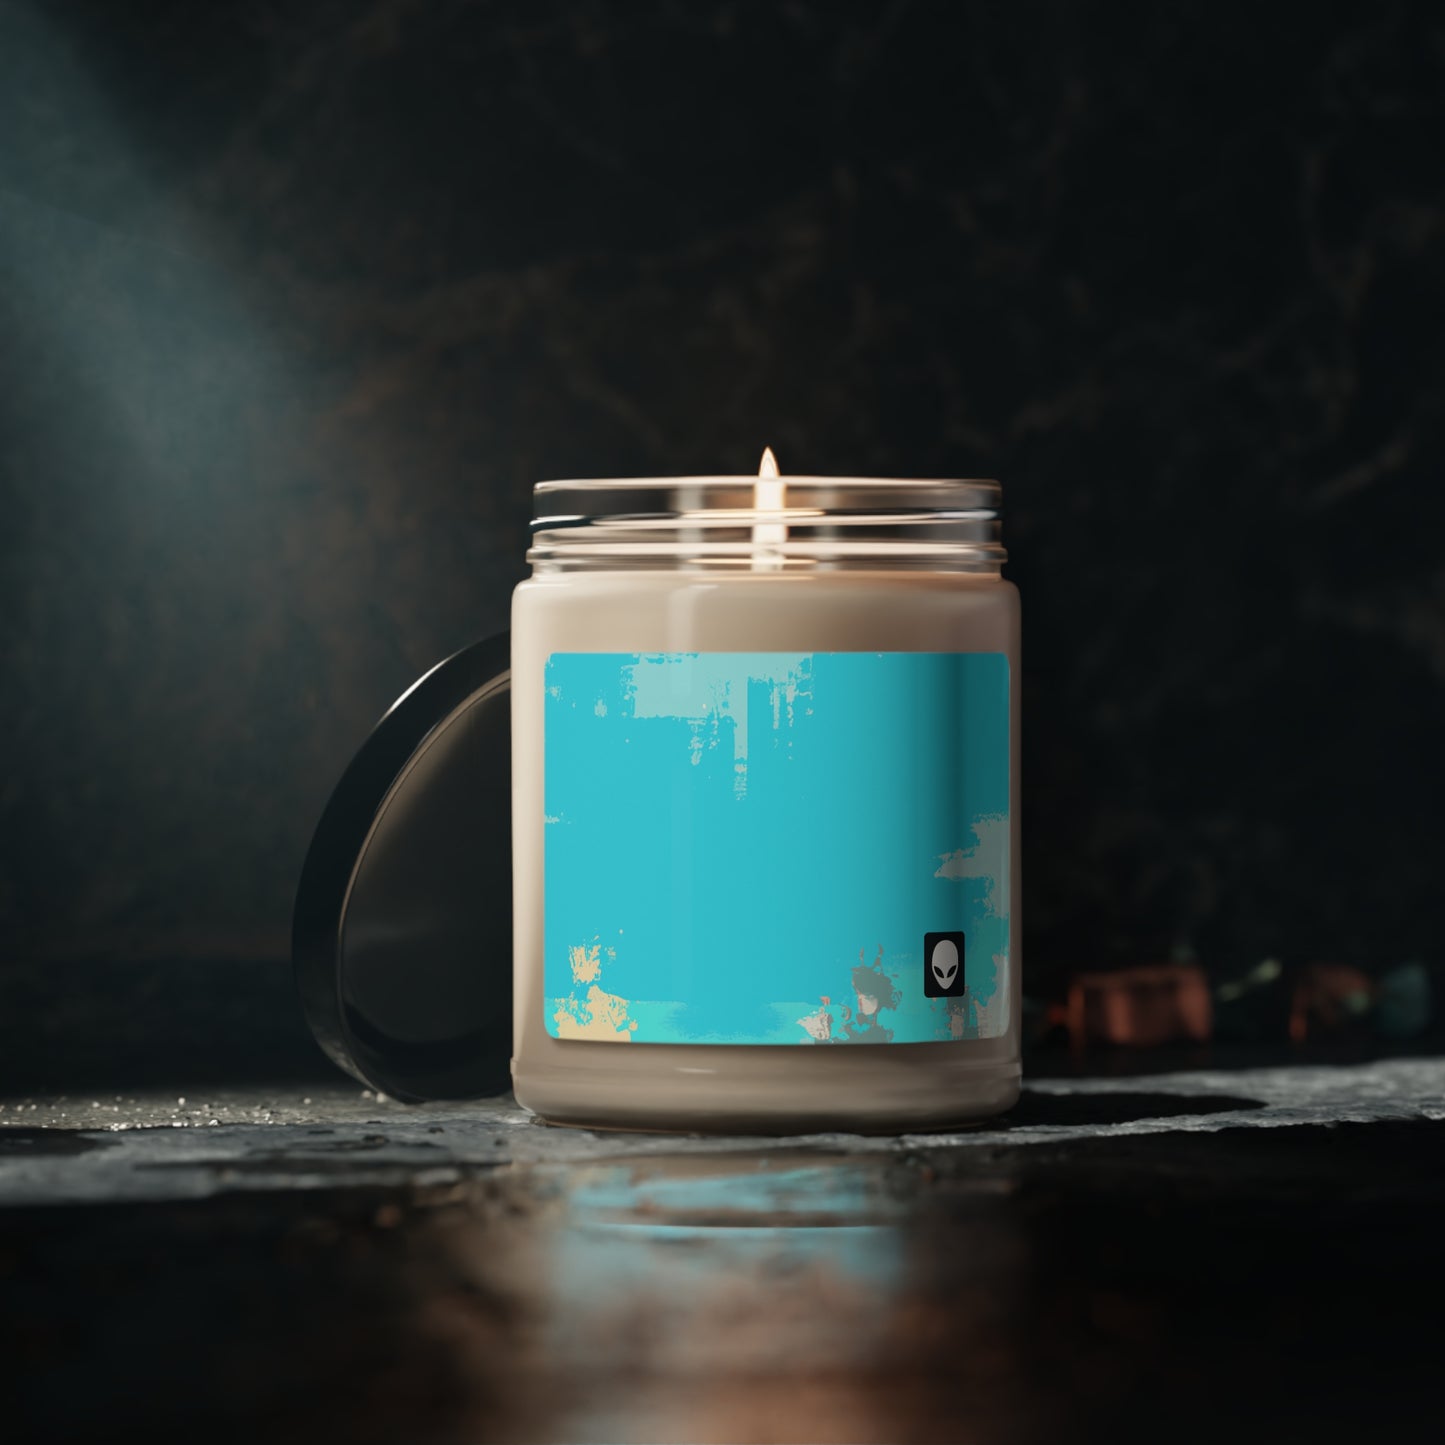 "A Breezy Skyscape: A Combination of Tradition and Modernity" - The Alien Eco-friendly Soy Candle